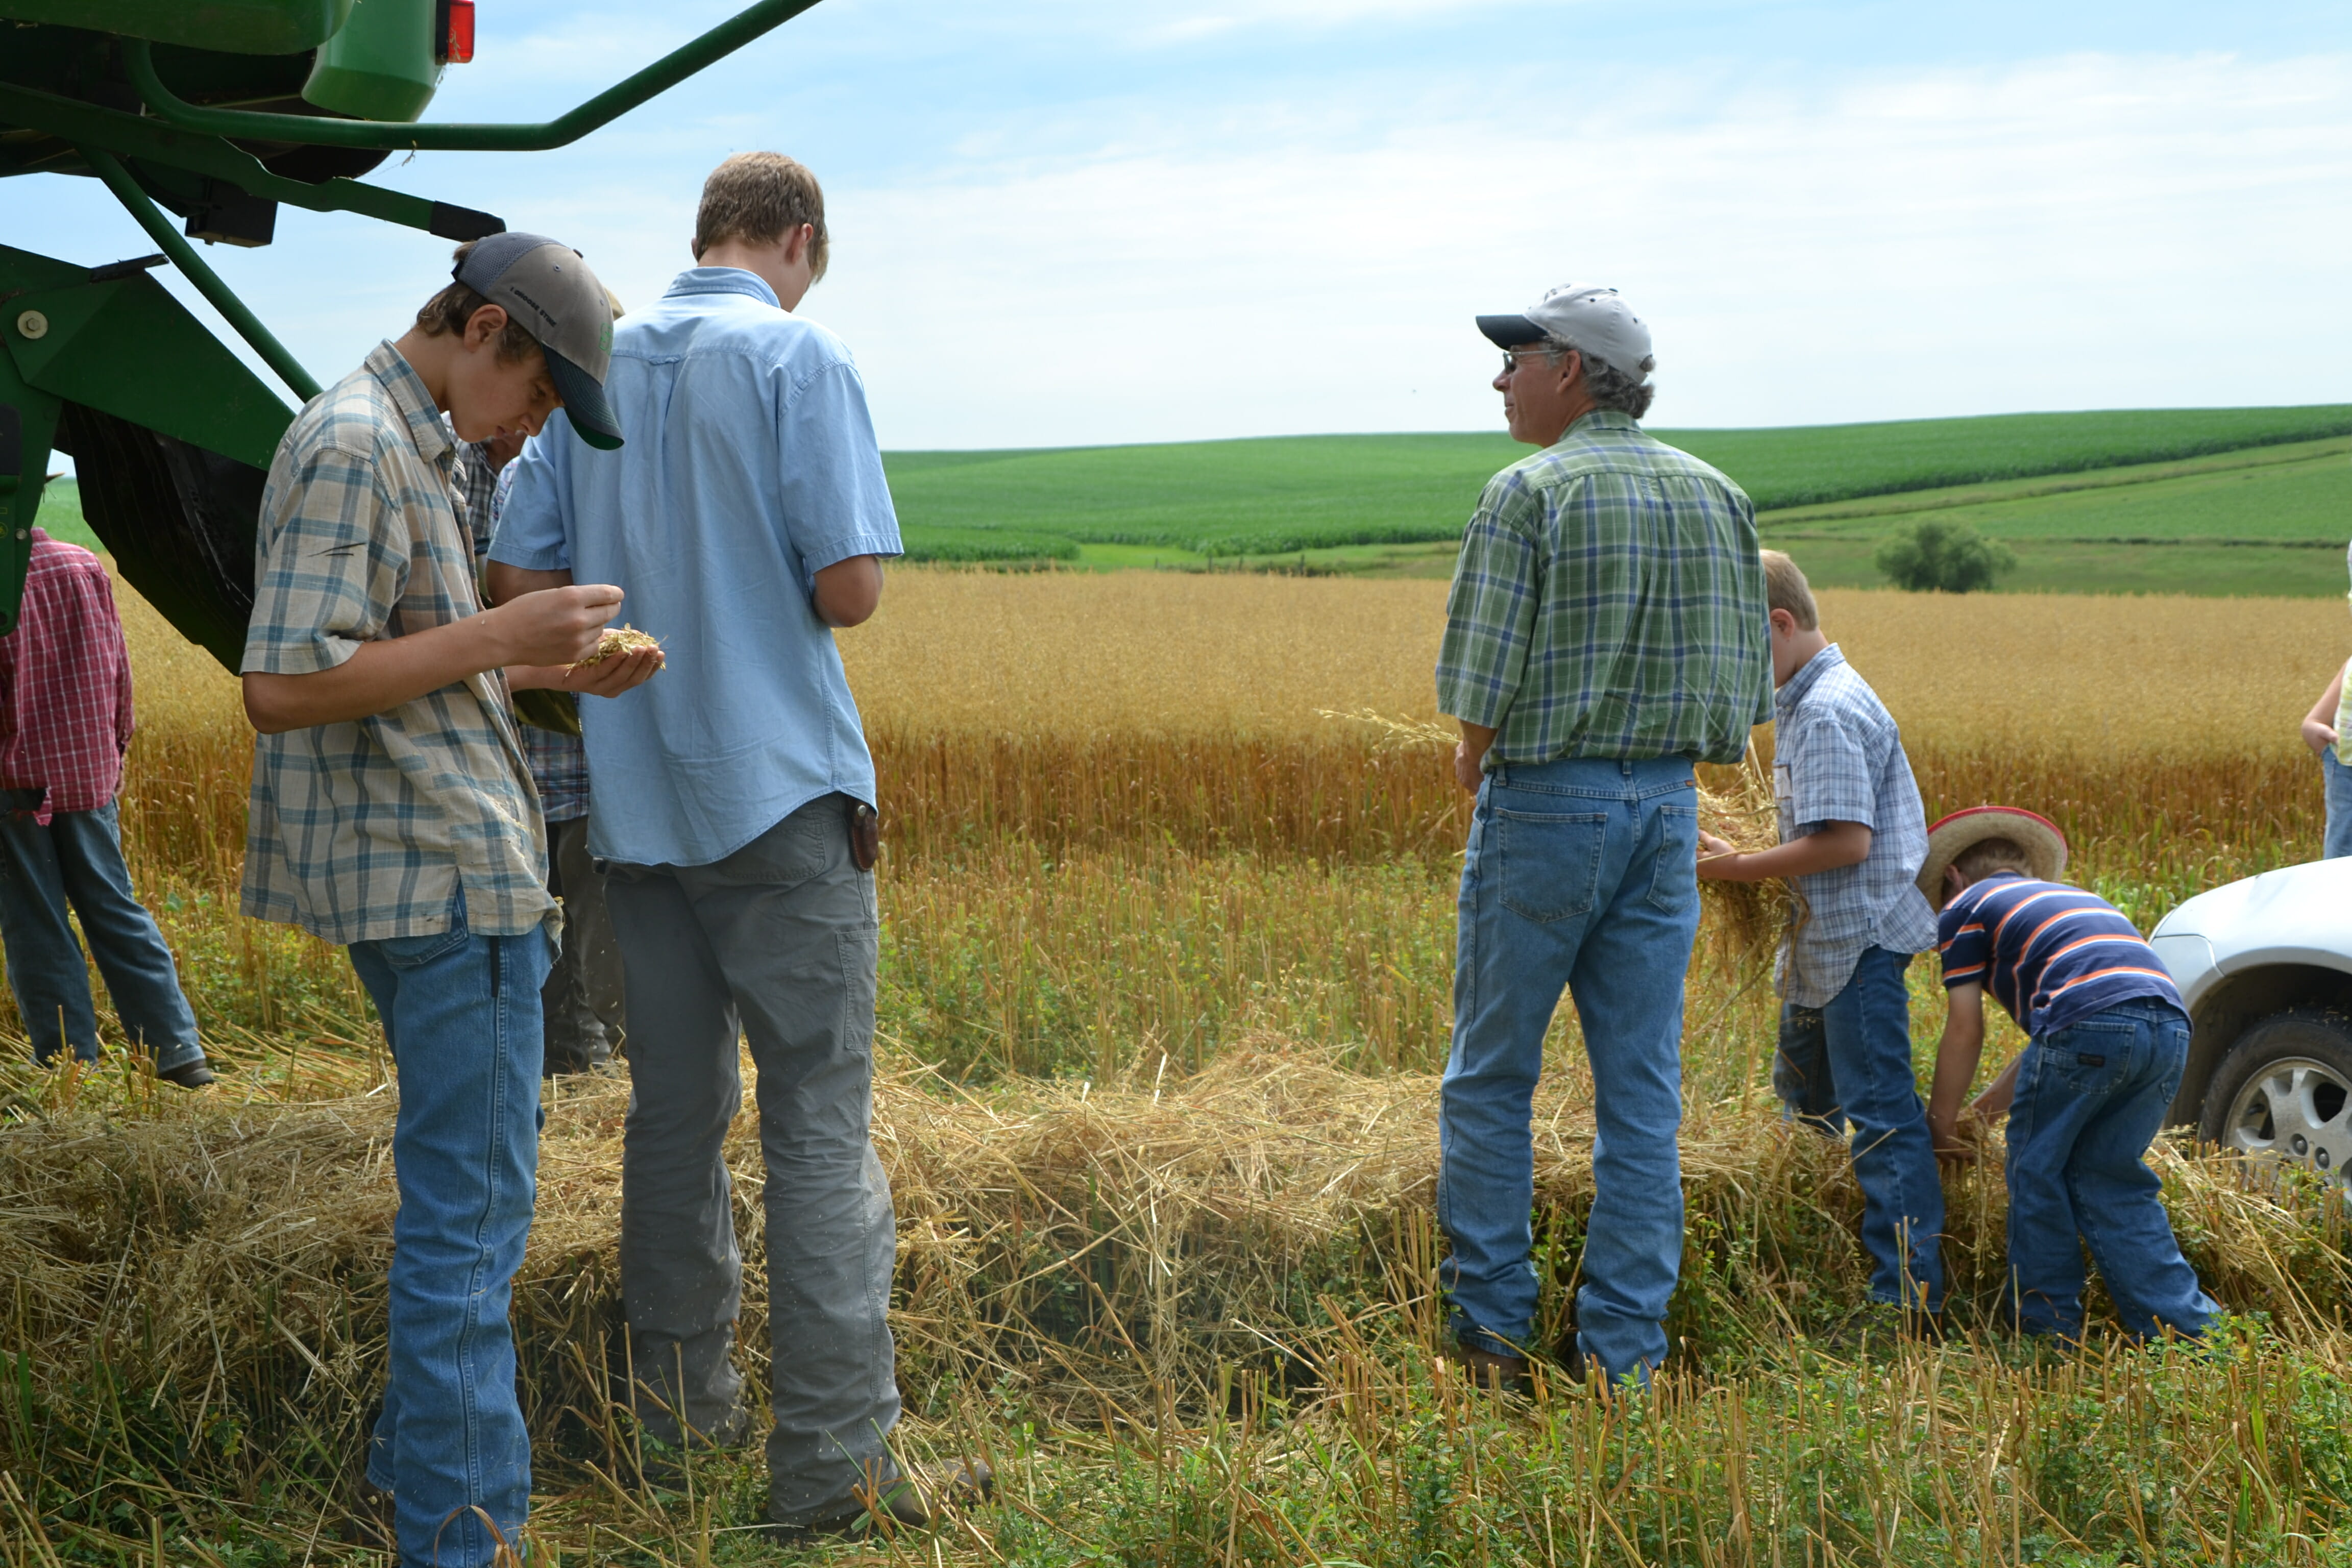 Attendees inspect the alfalfa underseeding from a harvested swath of oats.